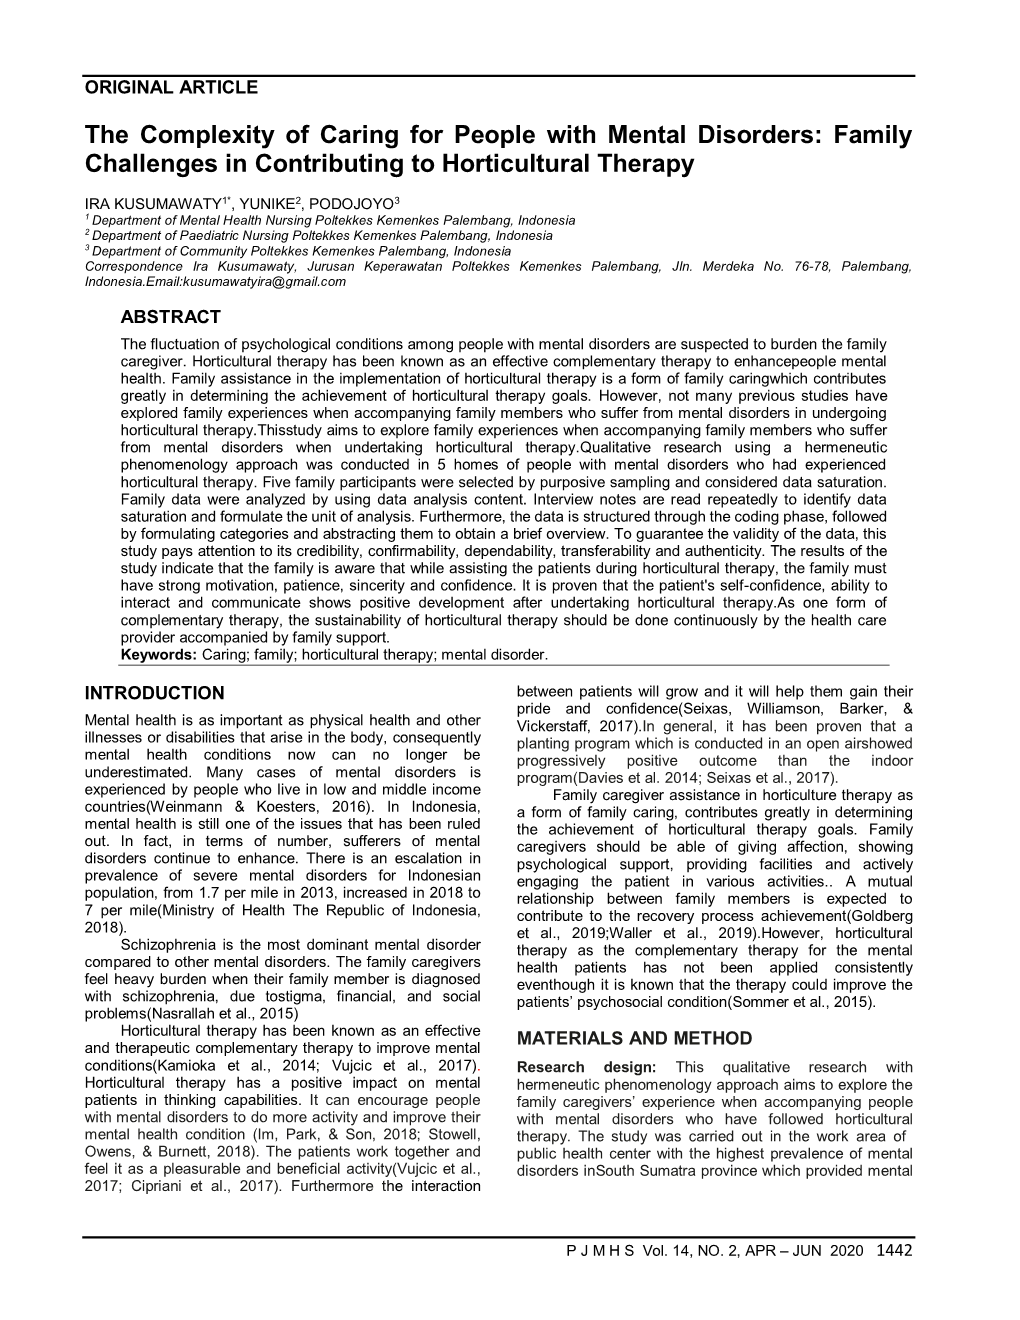 The Complexity of Caring for People with Mental Disorders: Family Challenges in Contributing to Horticultural Therapy